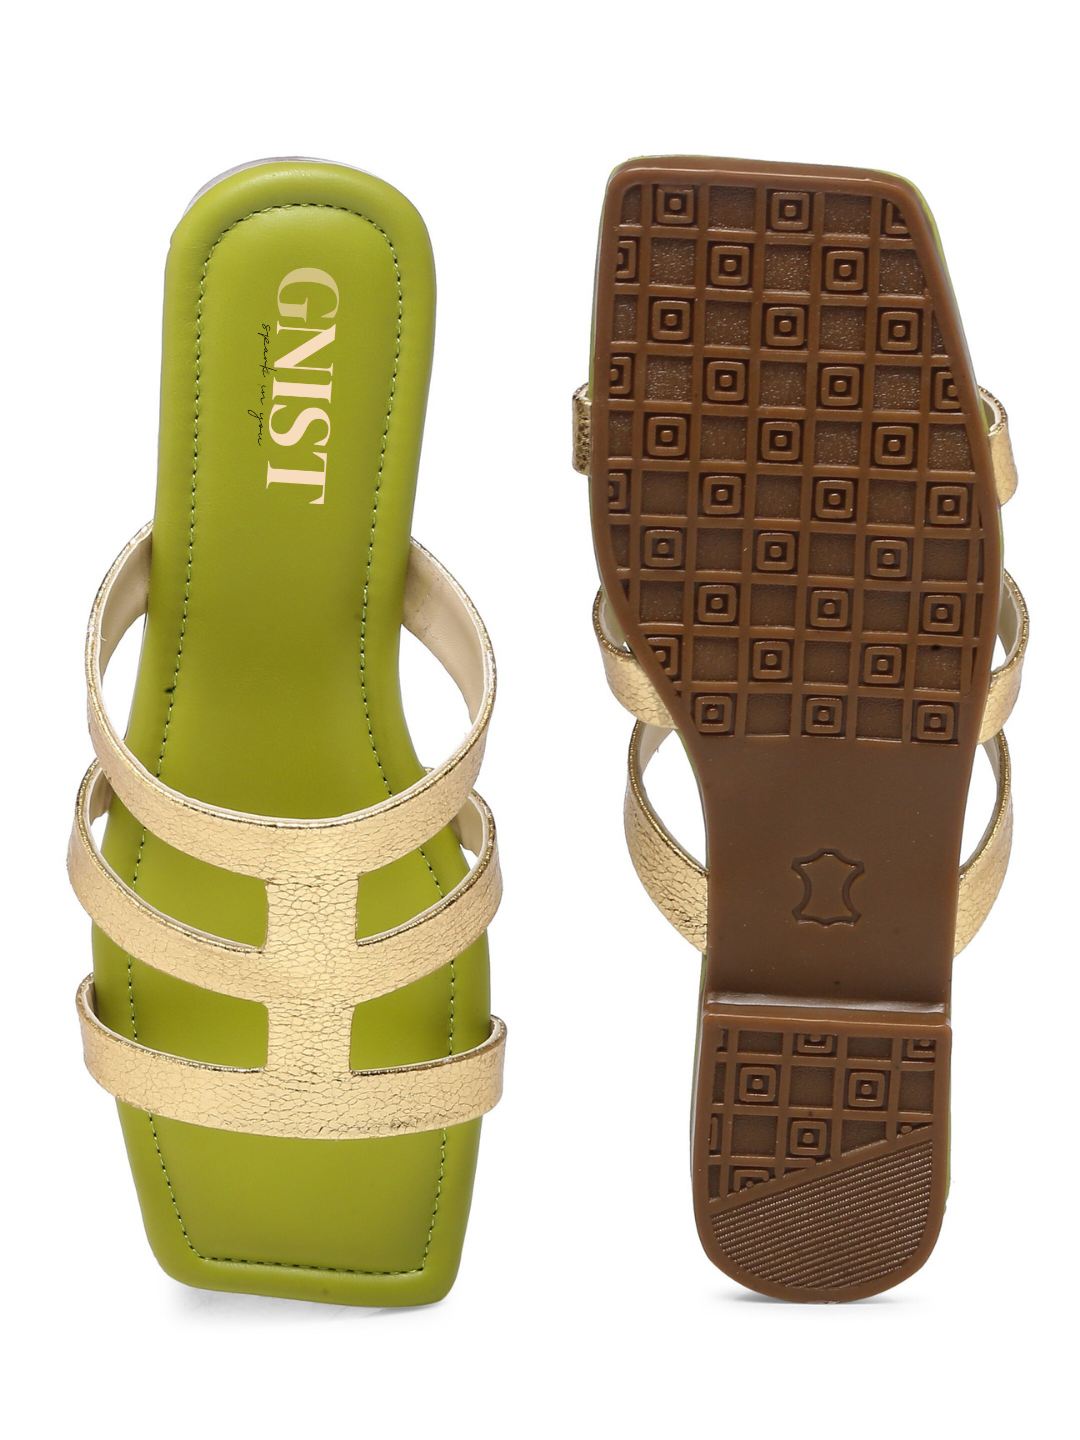 GNIST Green Gold Strappy Flats